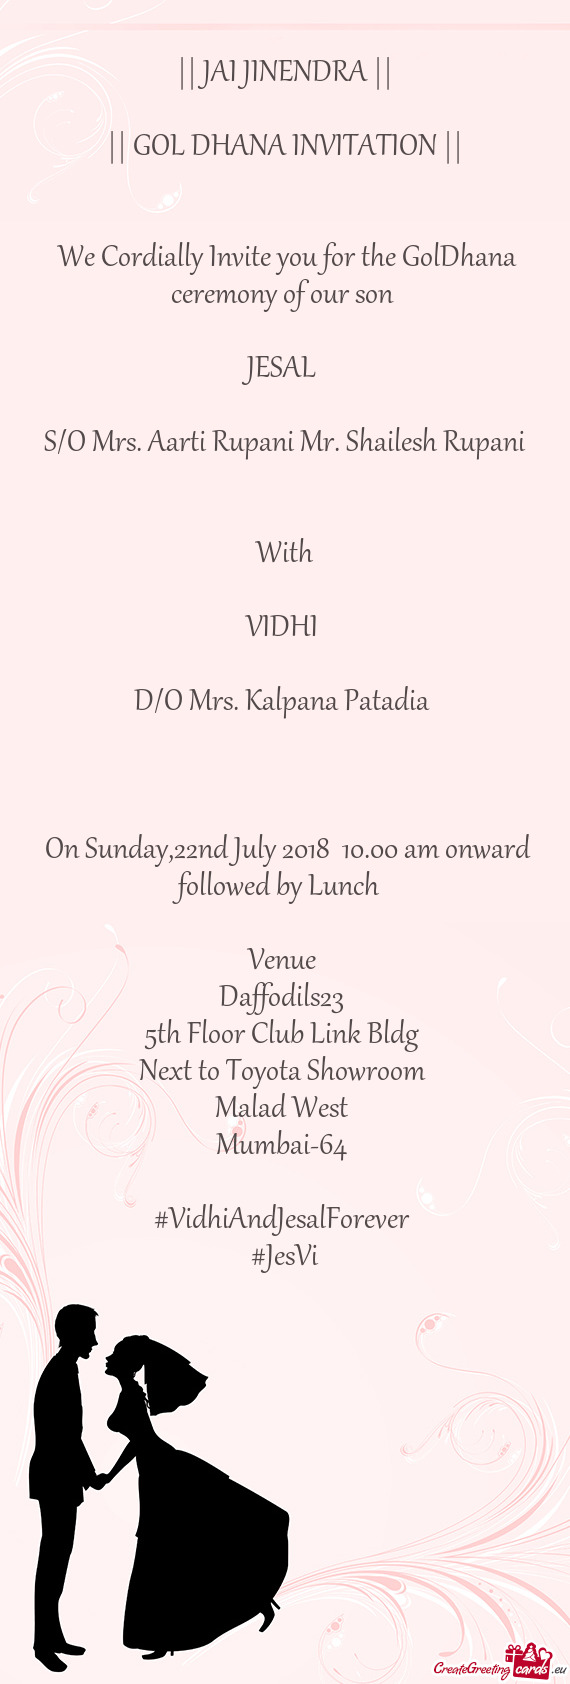 We Cordially Invite you for the GolDhana ceremony of our son